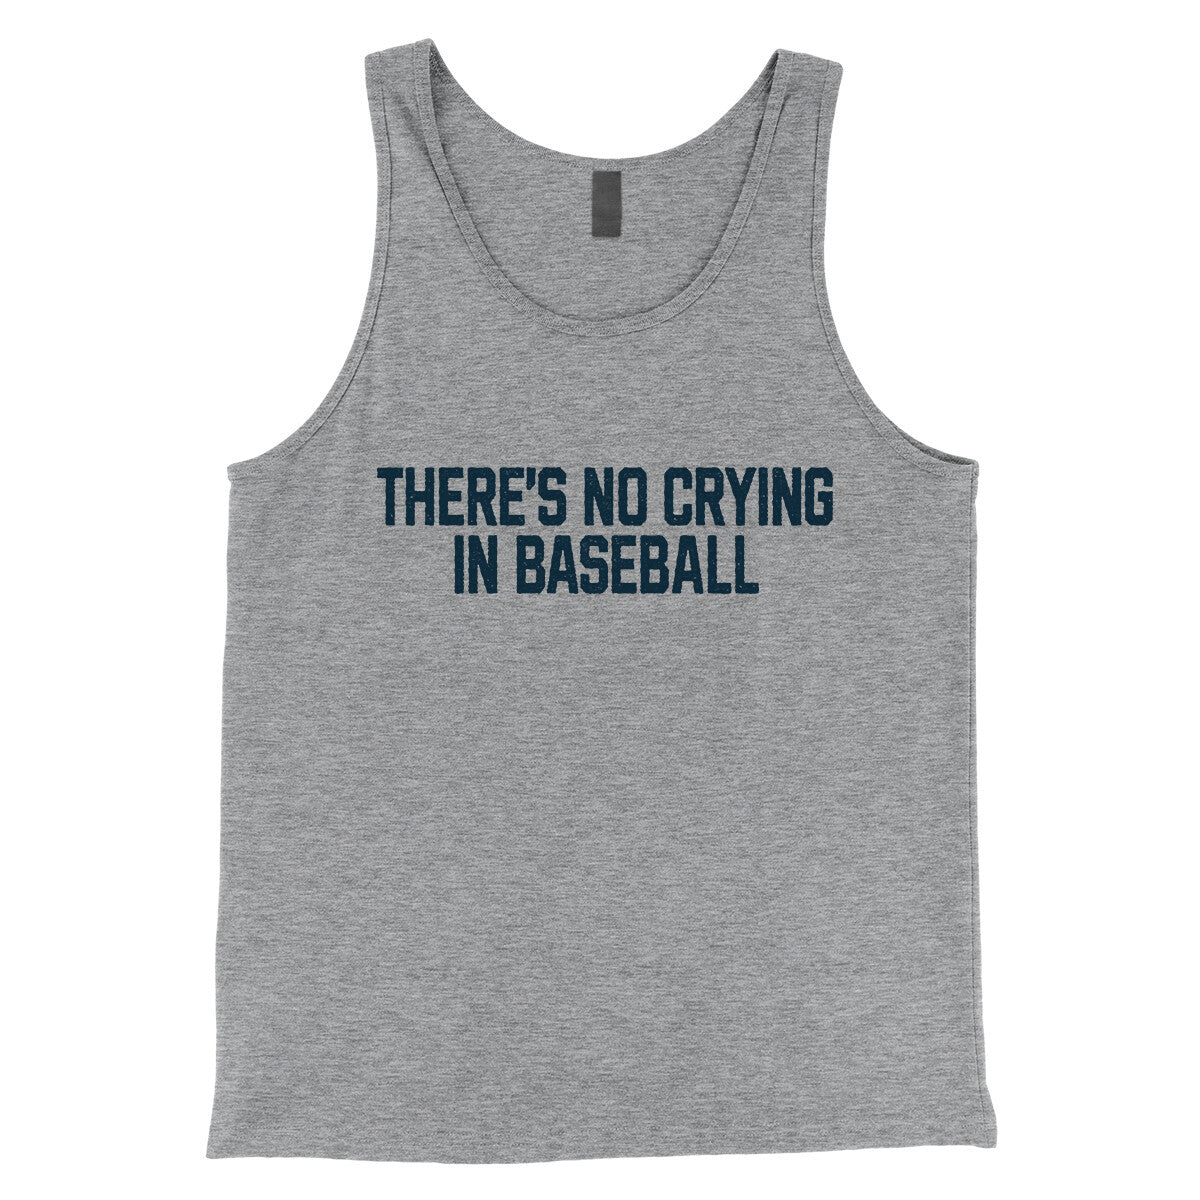 There's No Crying in Baseball in Athletic Heather Color